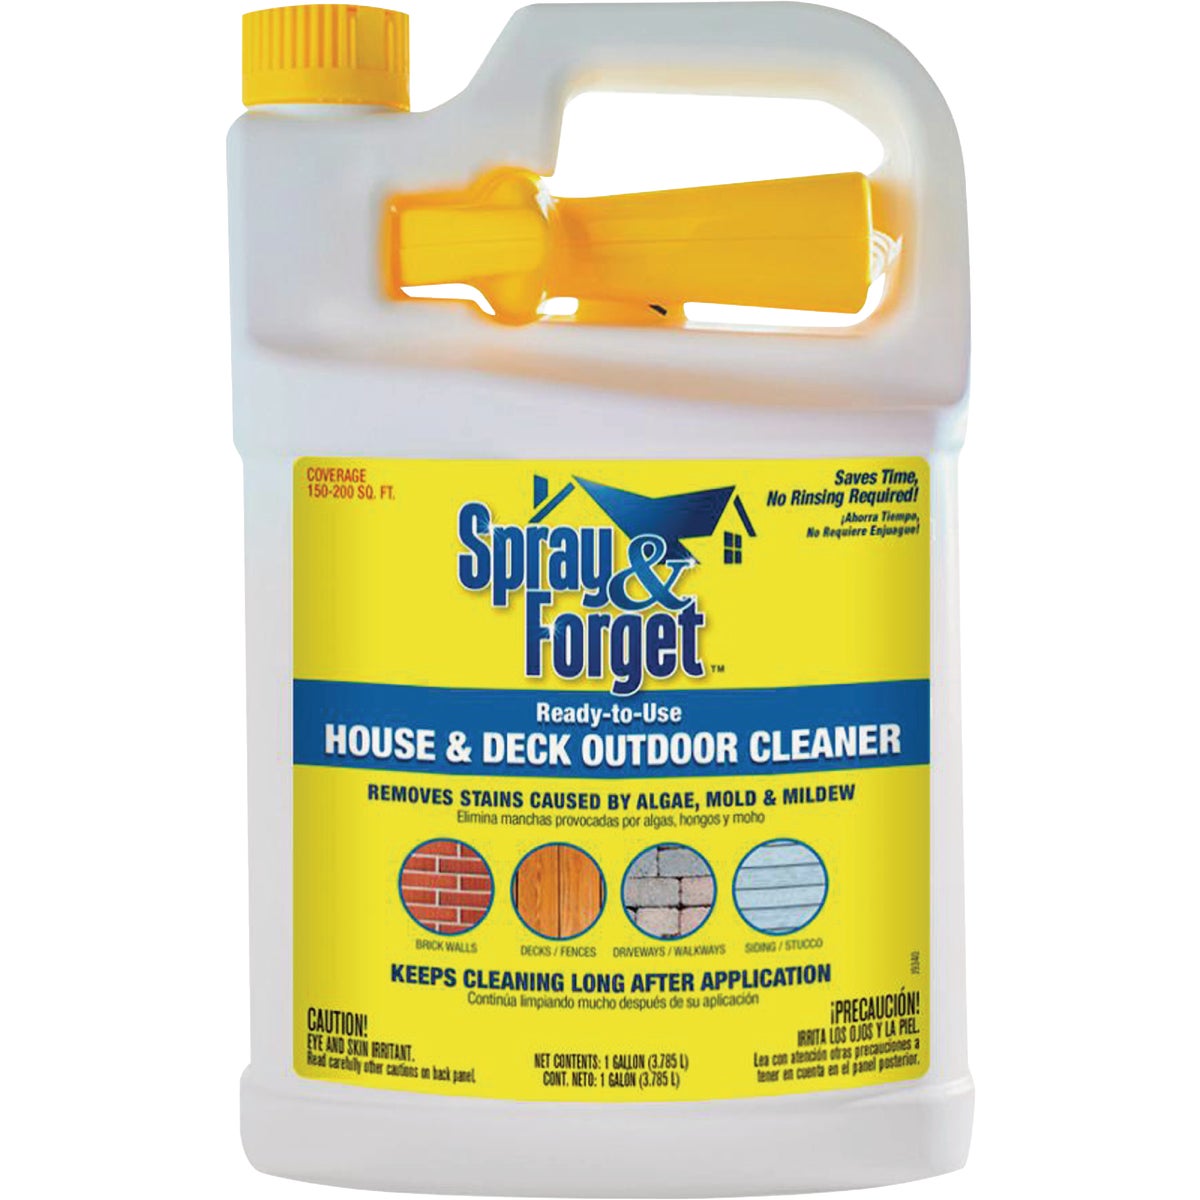 Spray & Forget 1 Gal. Ready-to-Use House & Deck Outdoor Cleaner